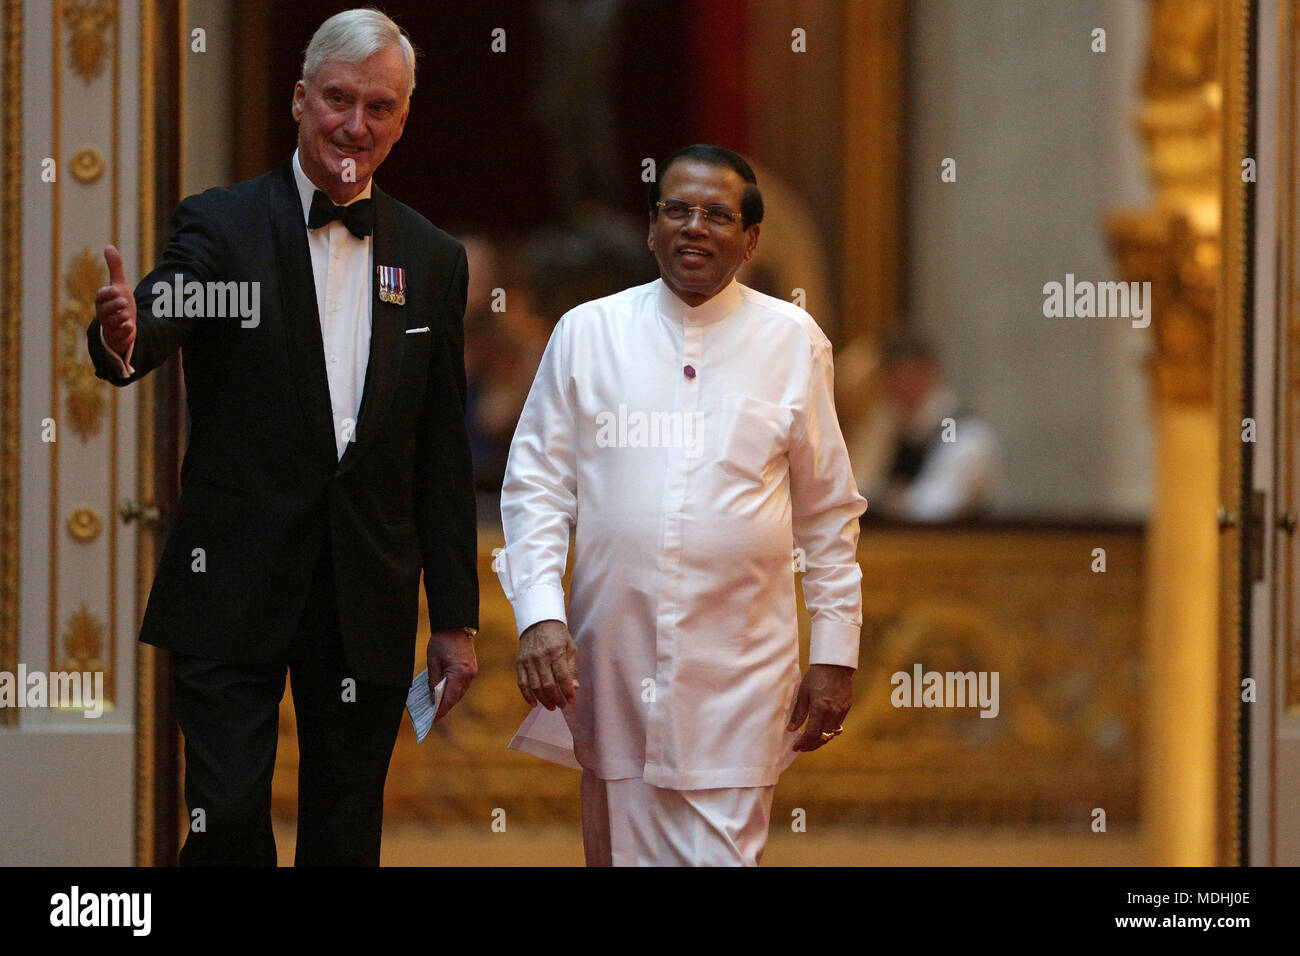 Sri Lanka's President Maithripala Sirisena (right) arrives in the East Gallery at Buckingham Palace in London as Queen Elizabeth II hosts a dinner during the Commonwealth Heads of Government Meeting. Stock Photo